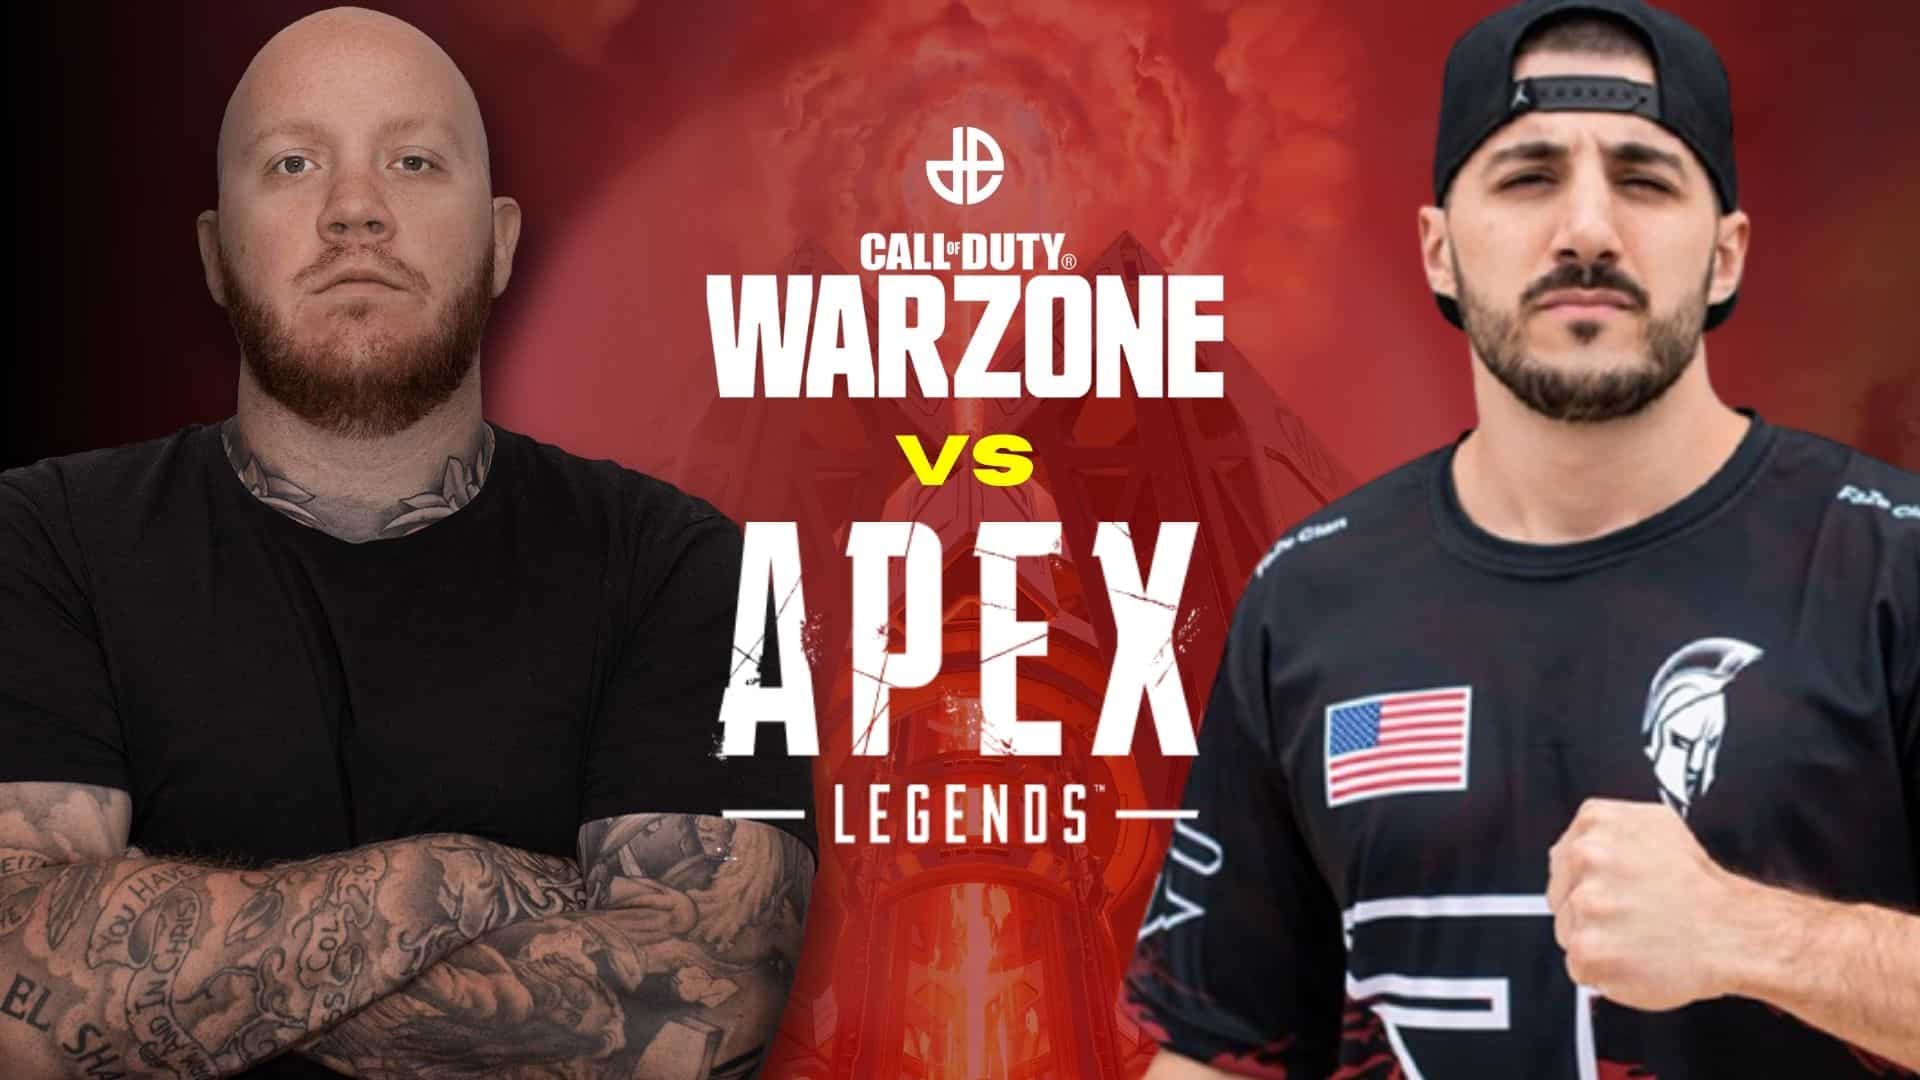 timthetatman and nickmercs with apex legends and warzone banner